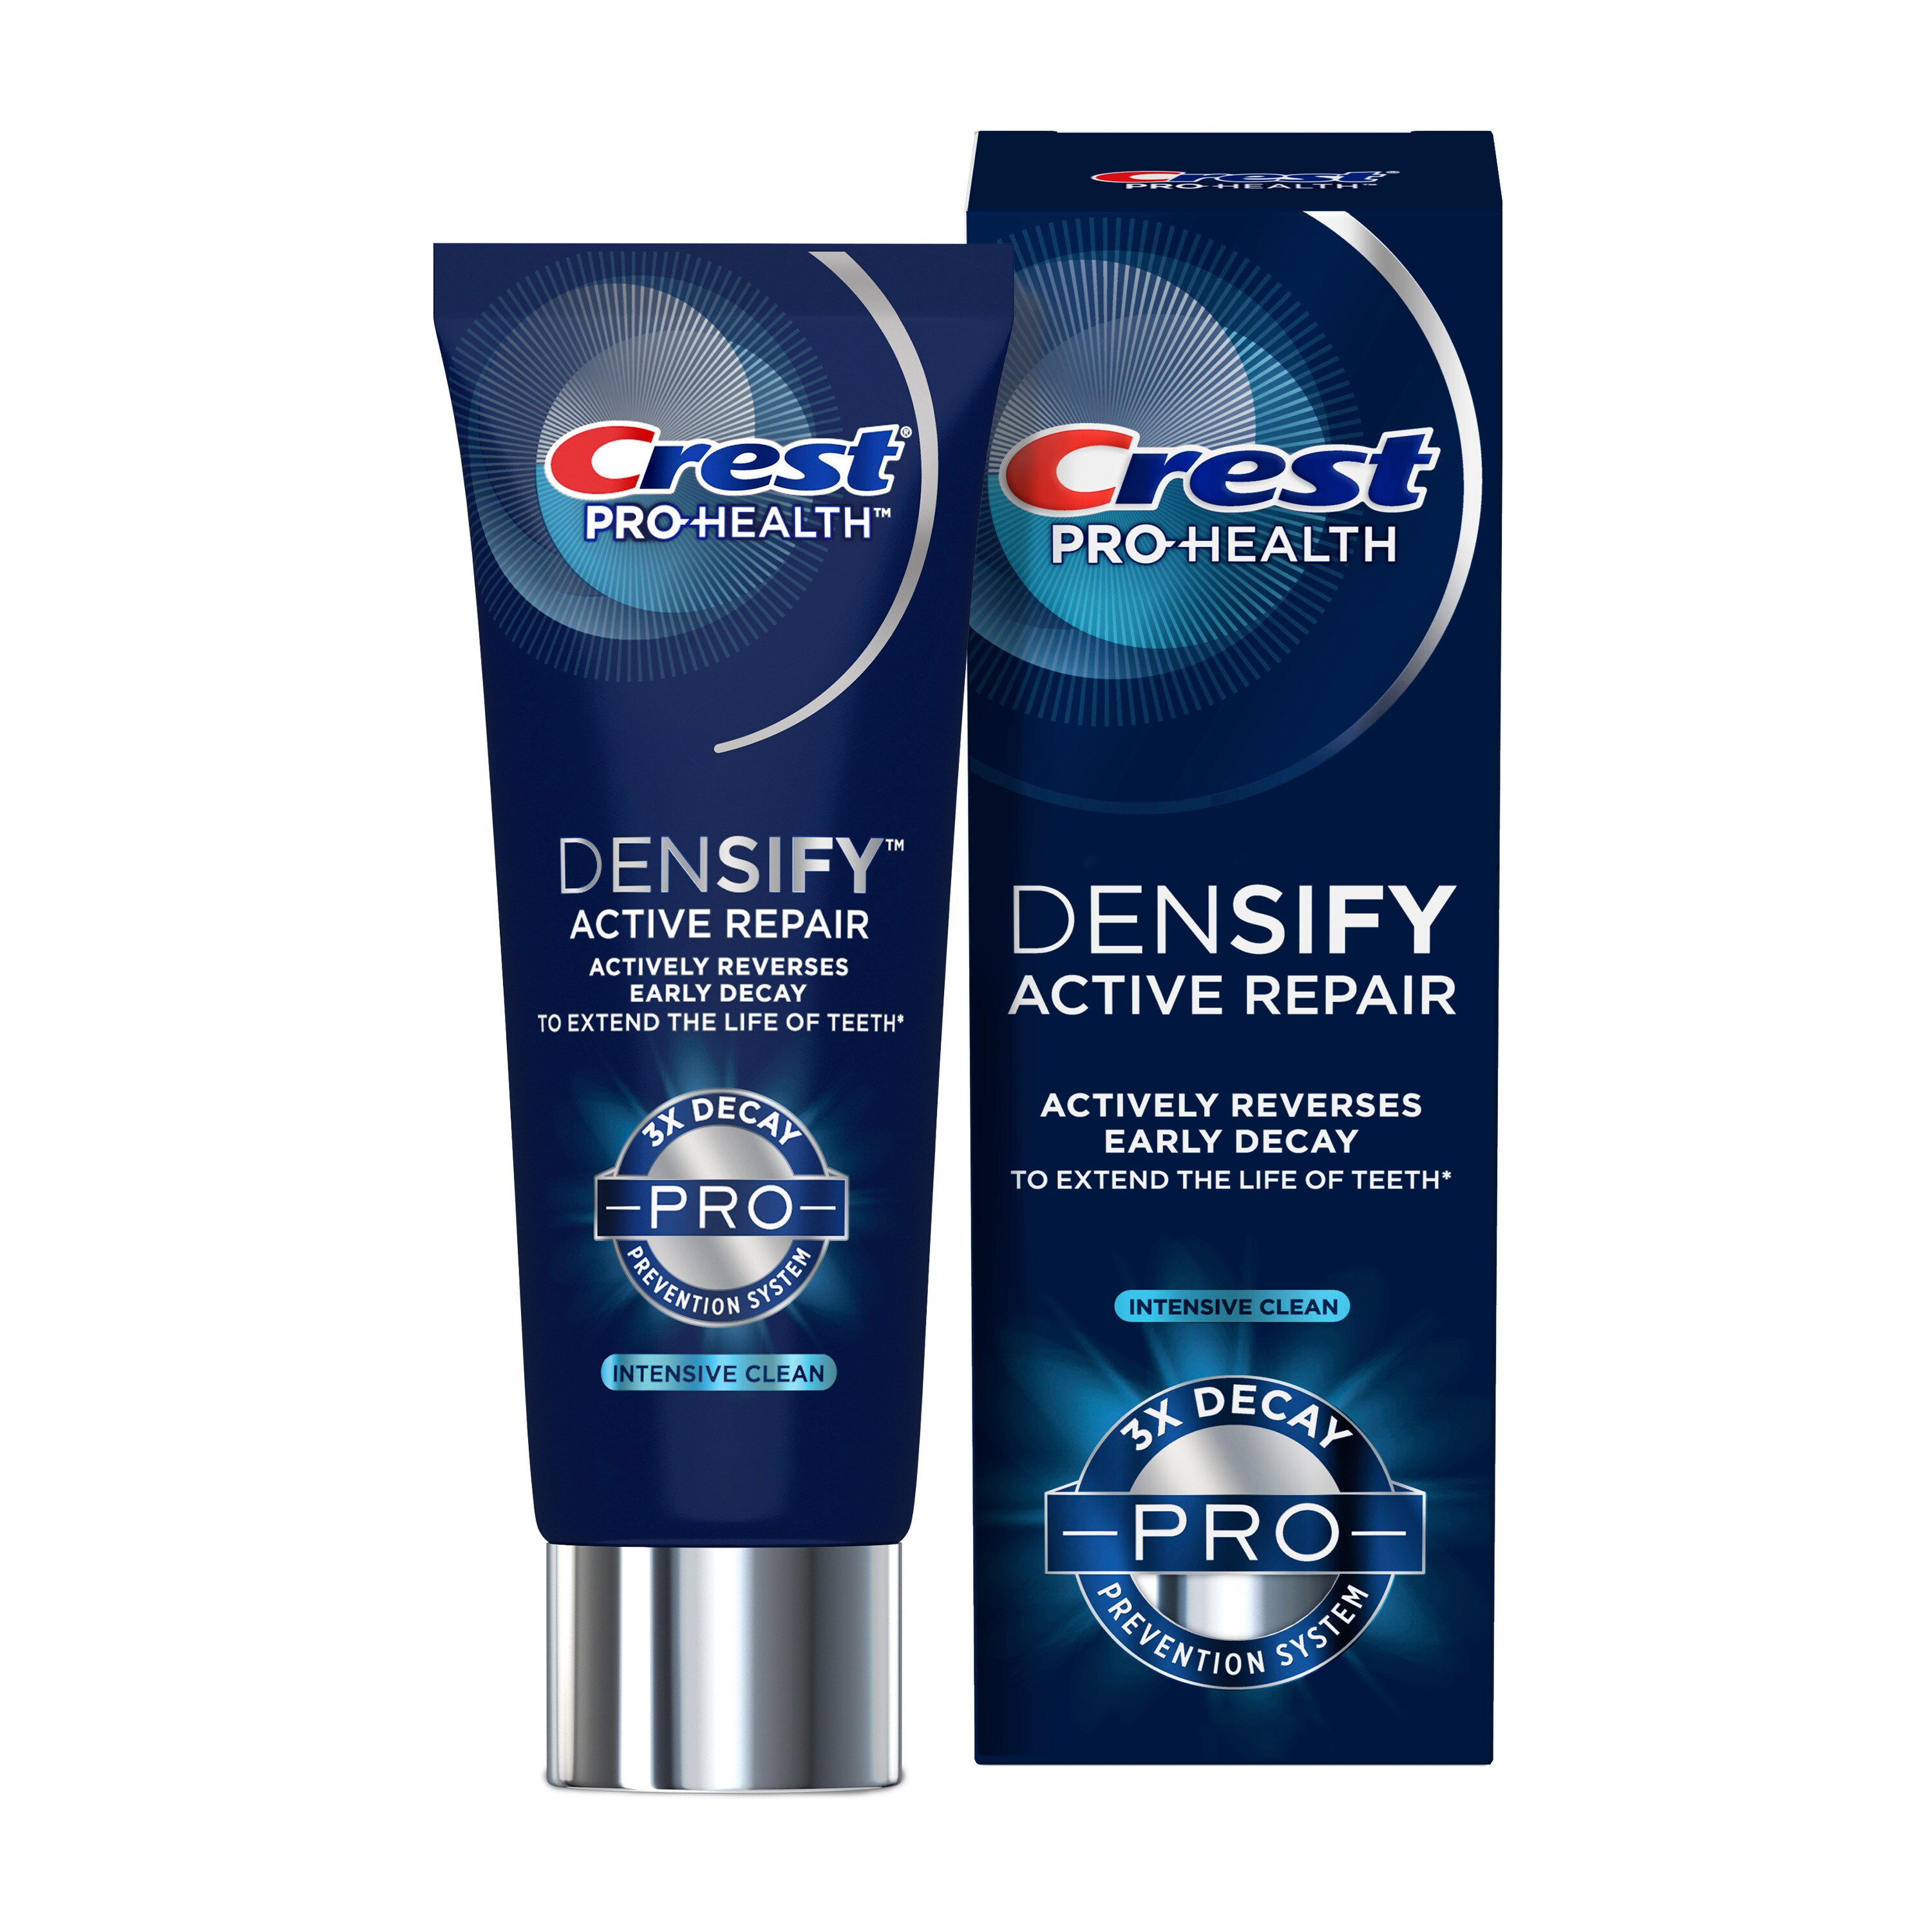 Crest Pro-Health Densify Active Repair Fluoride Toothpaste For Anticavity And Sensitive Teeth, 3x Decay Prevention System, Intensive Clean, 3.5 Oz